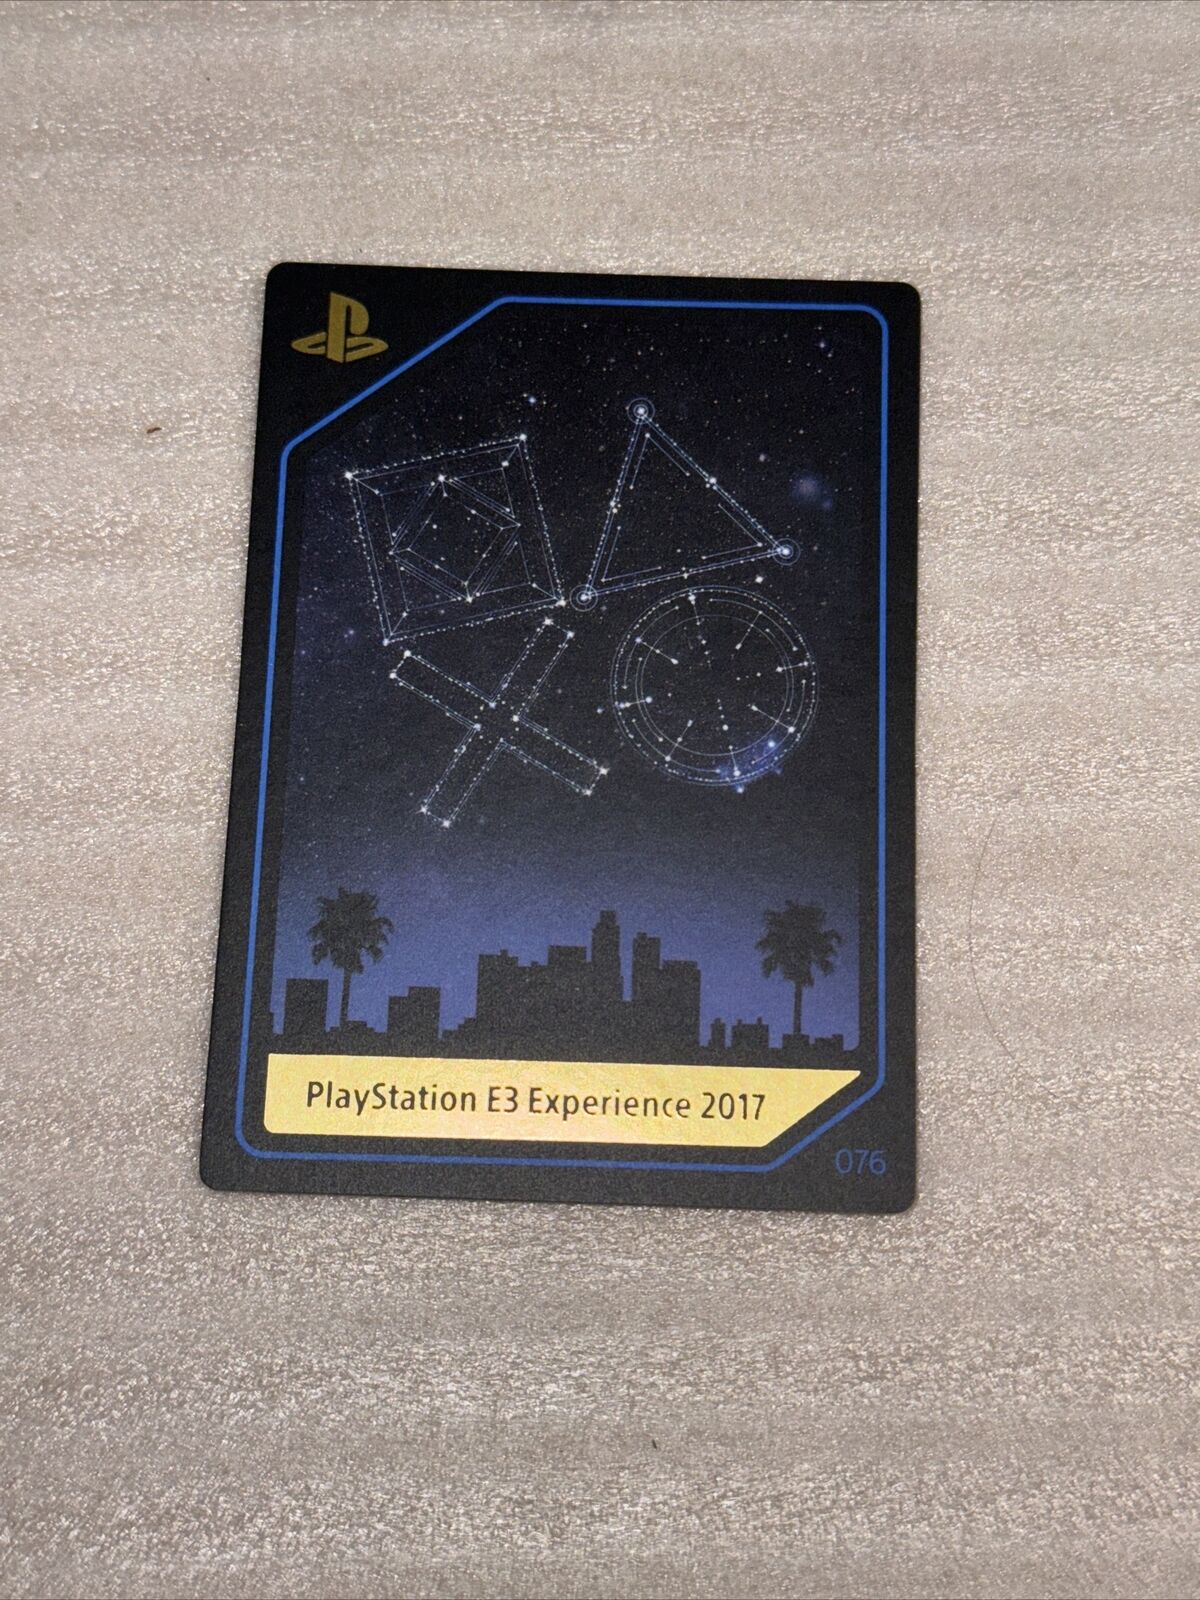 Playstation E3 Experience 2017 - Card Number 076 - Gold Foil